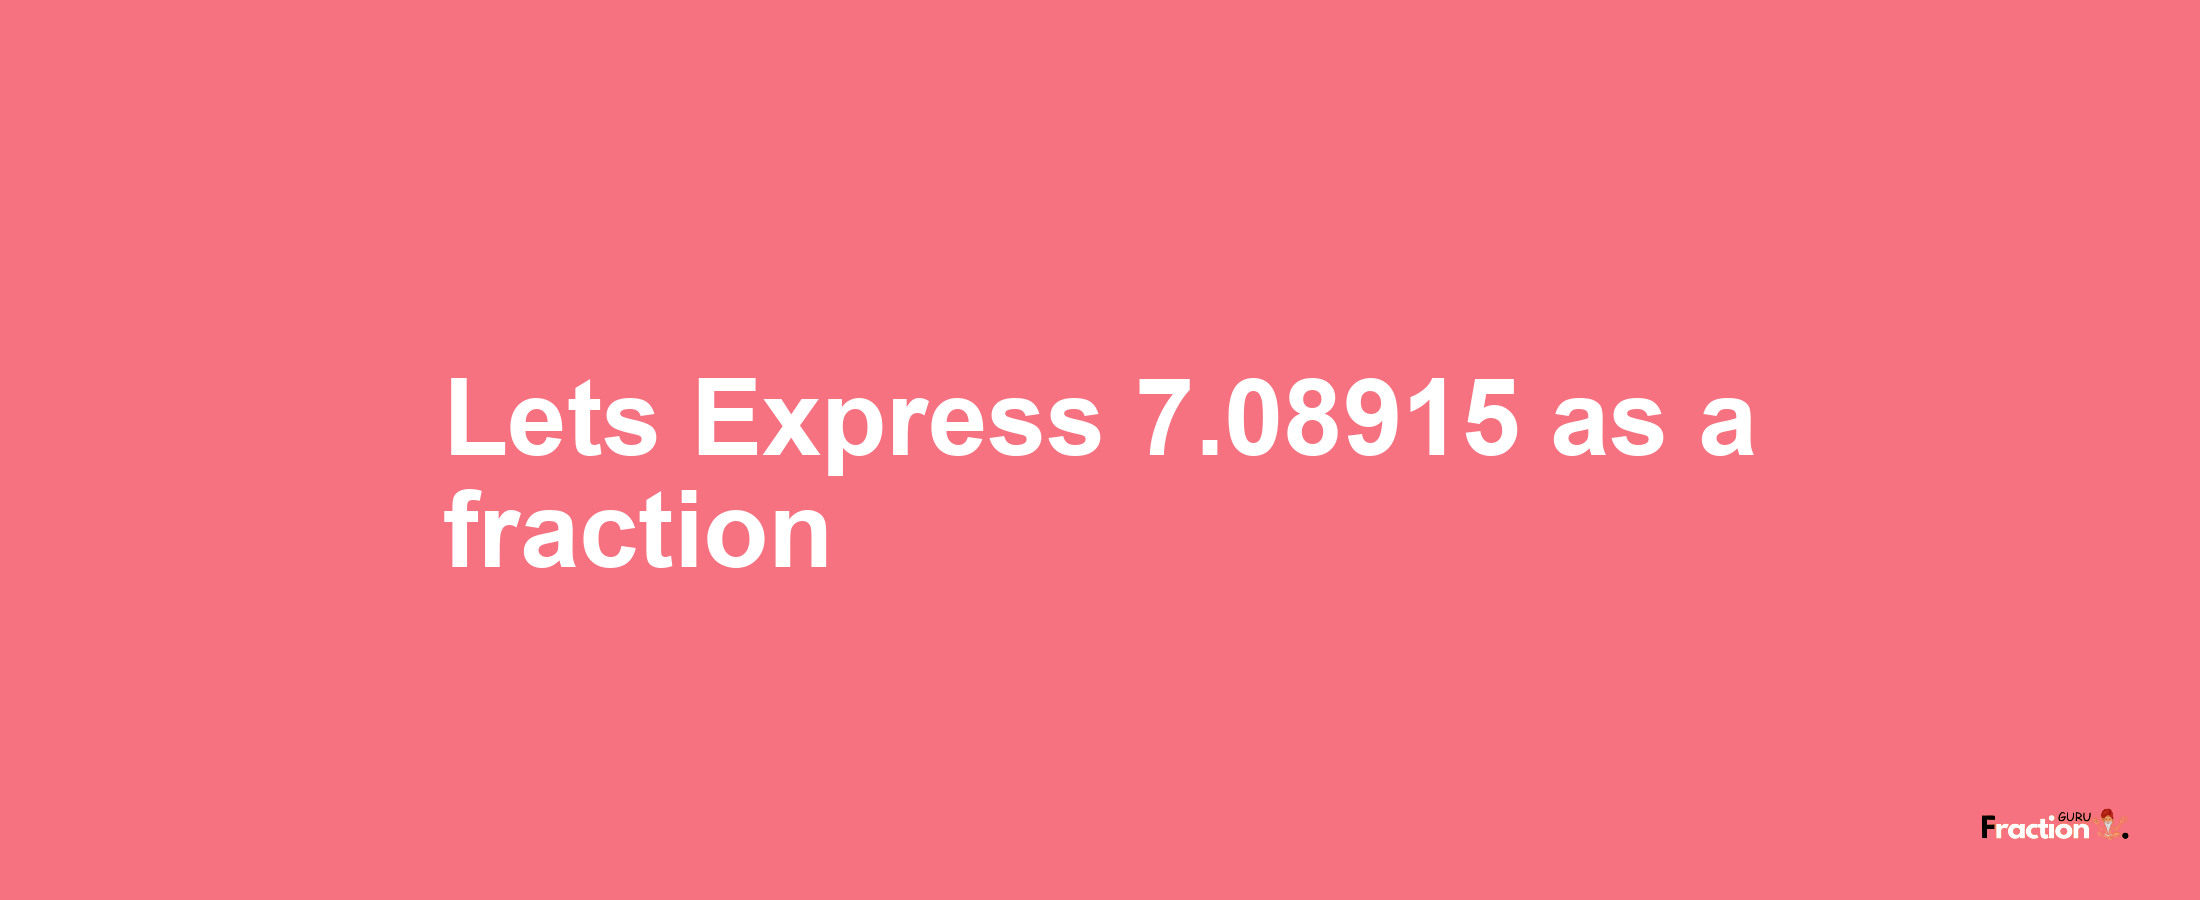 Lets Express 7.08915 as afraction